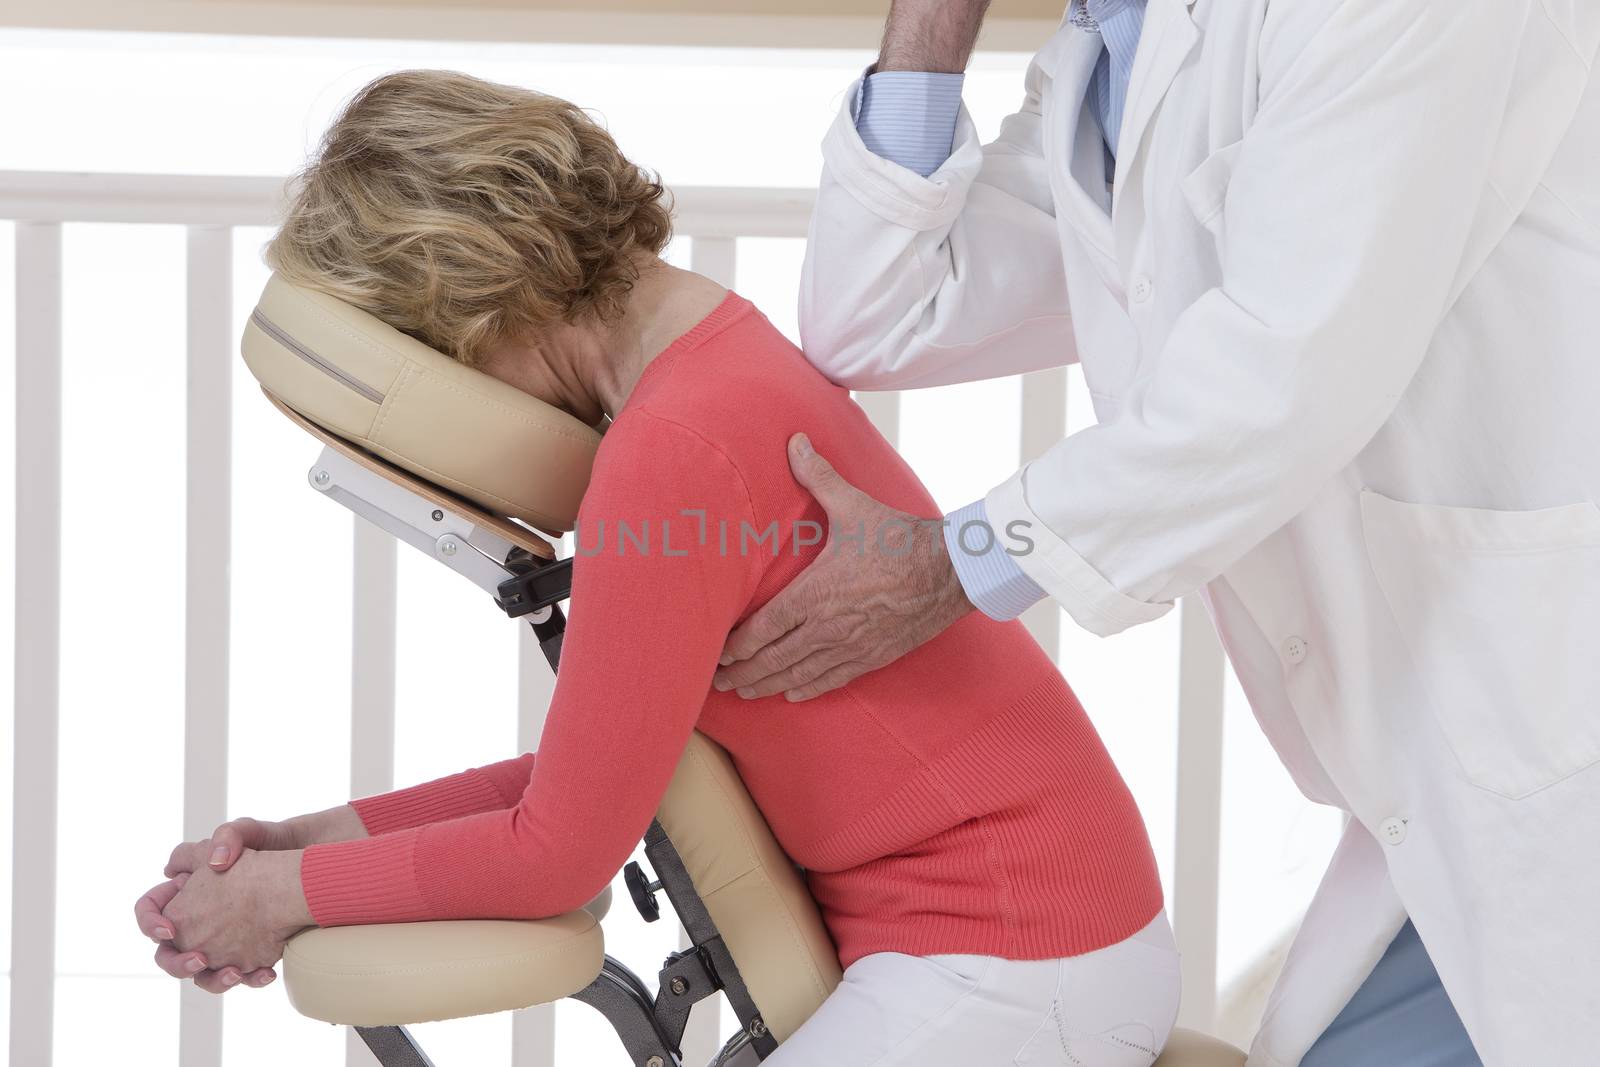 Woman having back massage in medical office by JPC-PROD